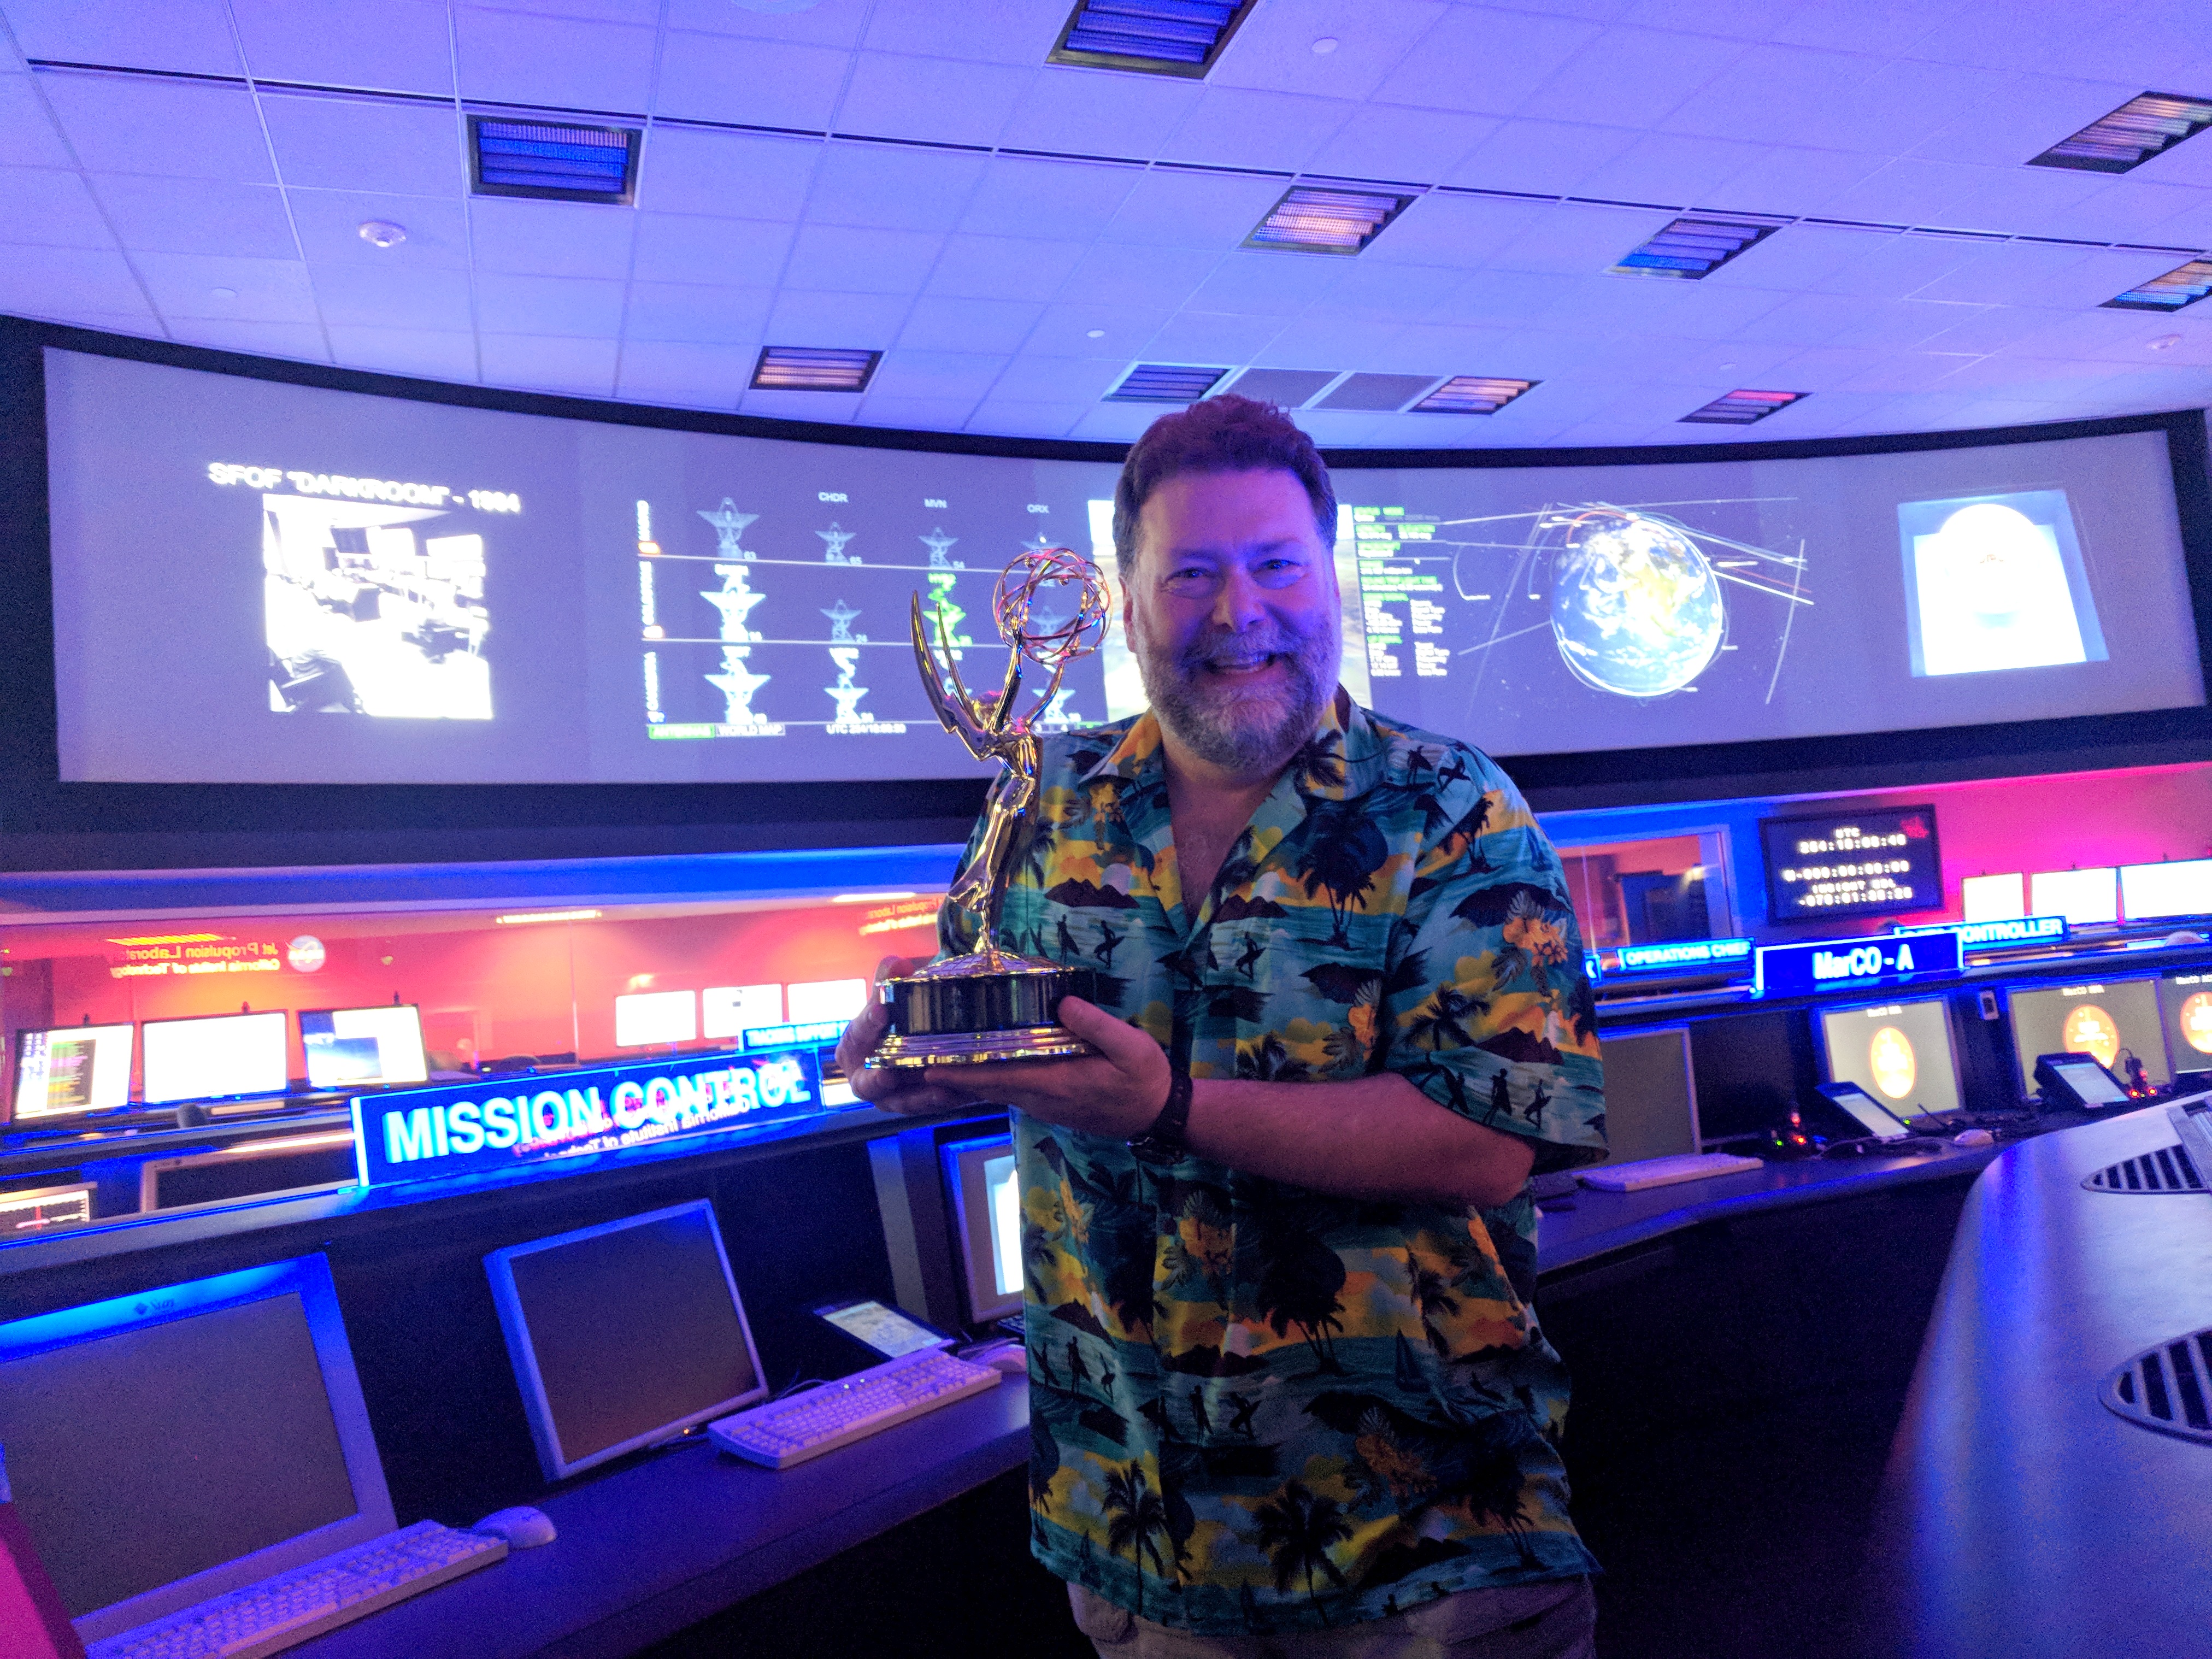 Todd in mission control holding an Emmy award statue.